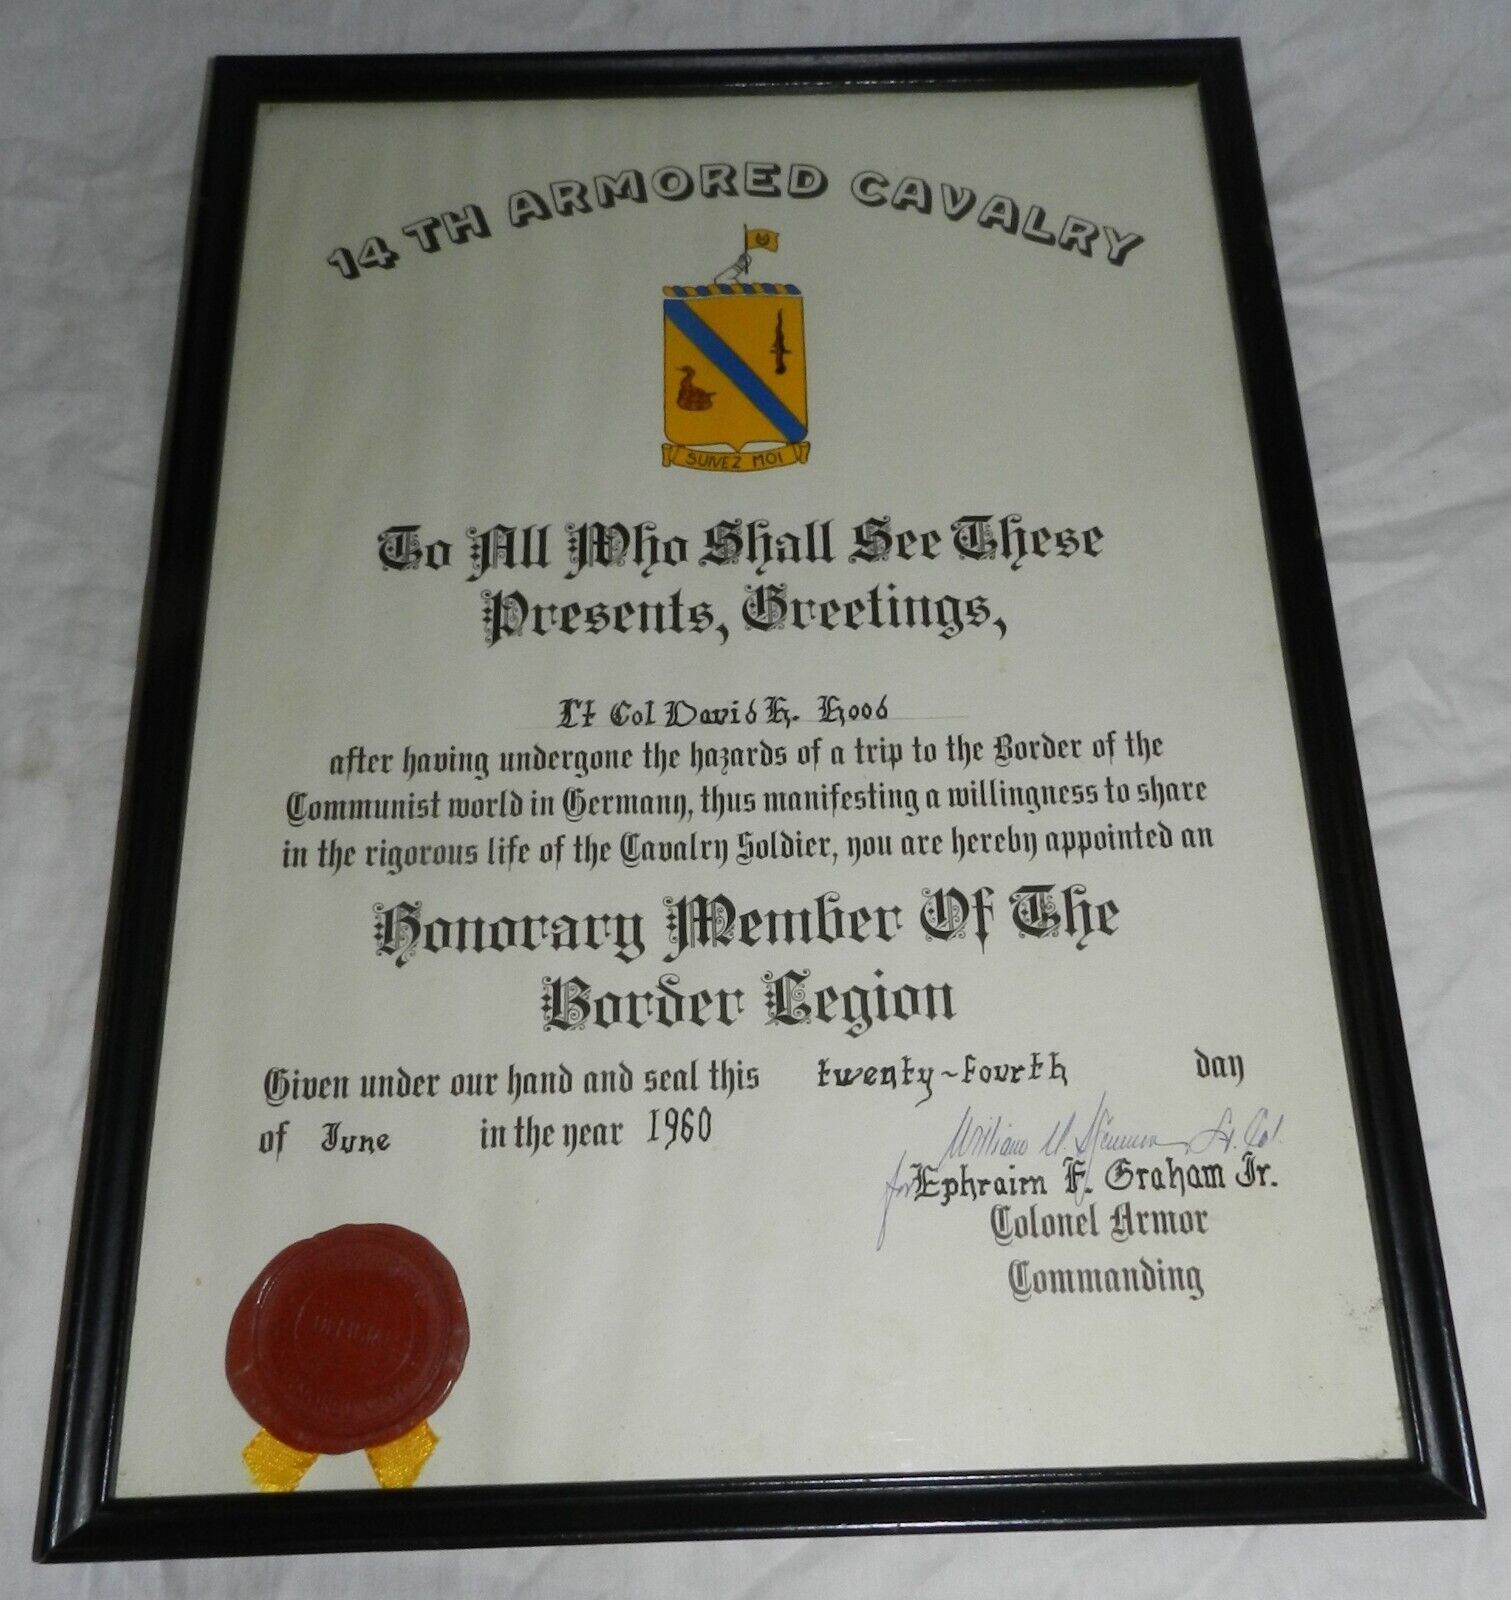 Framed 1960 Certificate with Seal - Honorary Member of the Border Legion